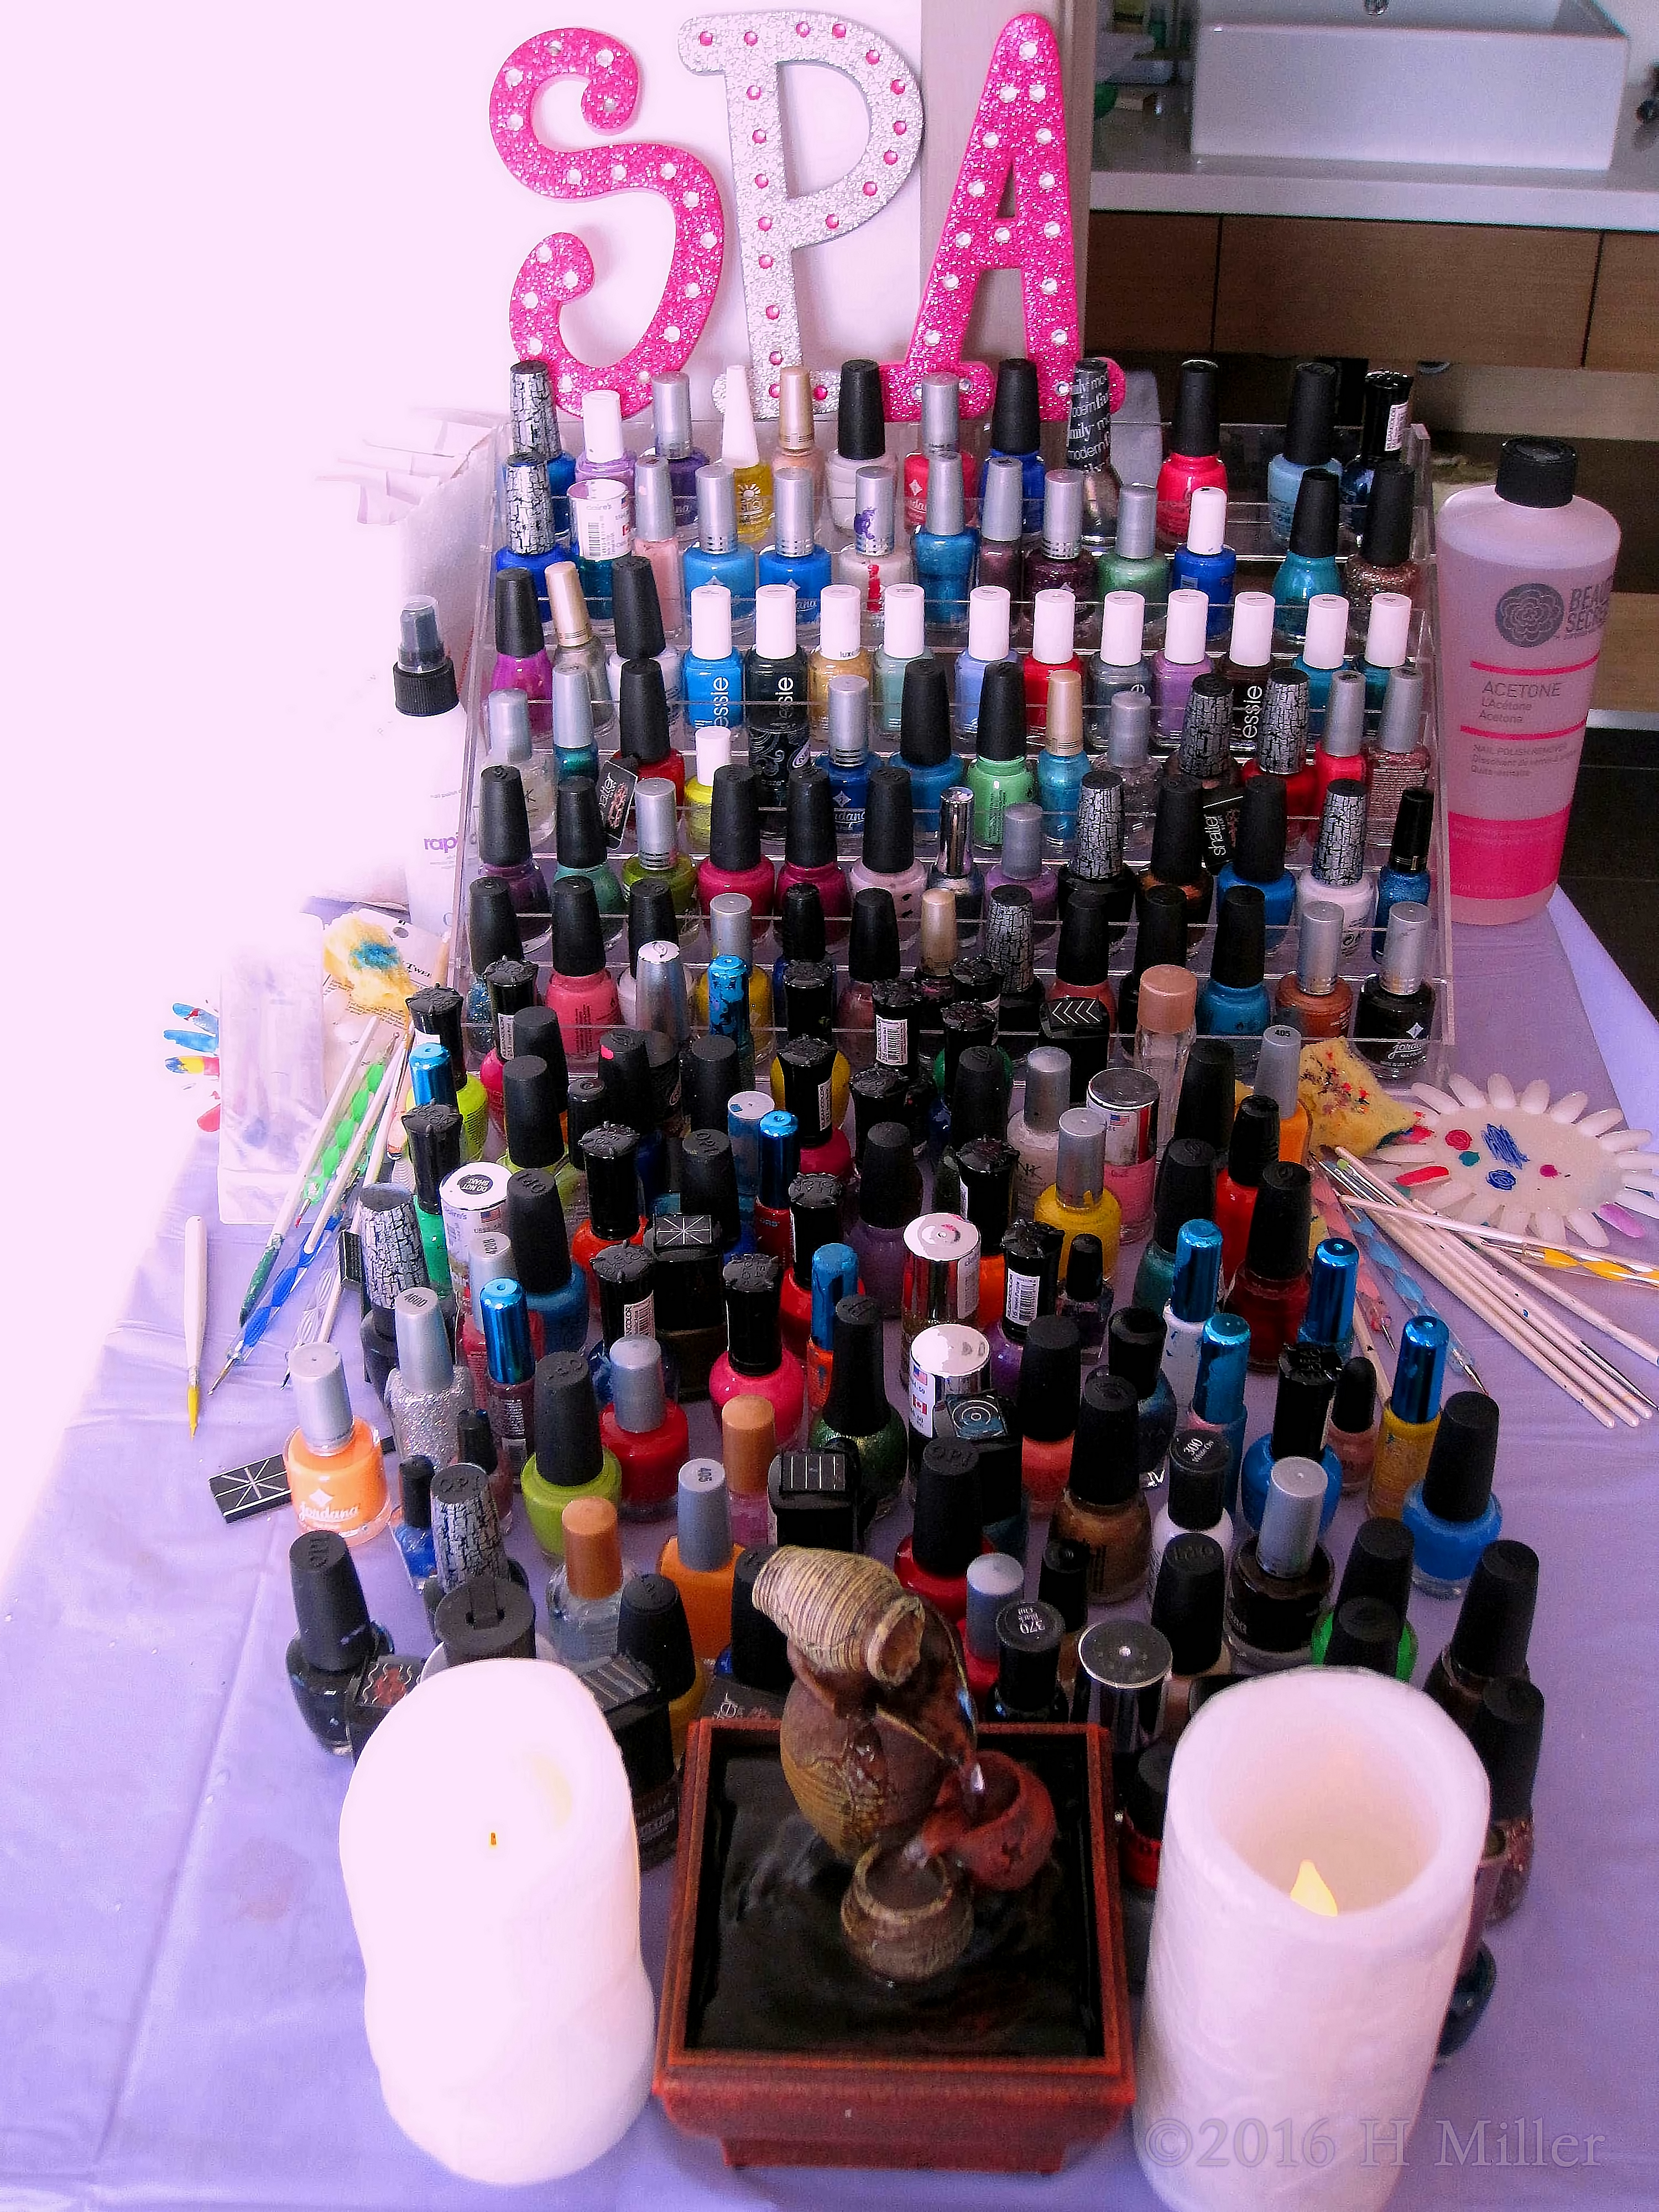 Amazing Nail Polishes Collection For The Girls Spa Party.